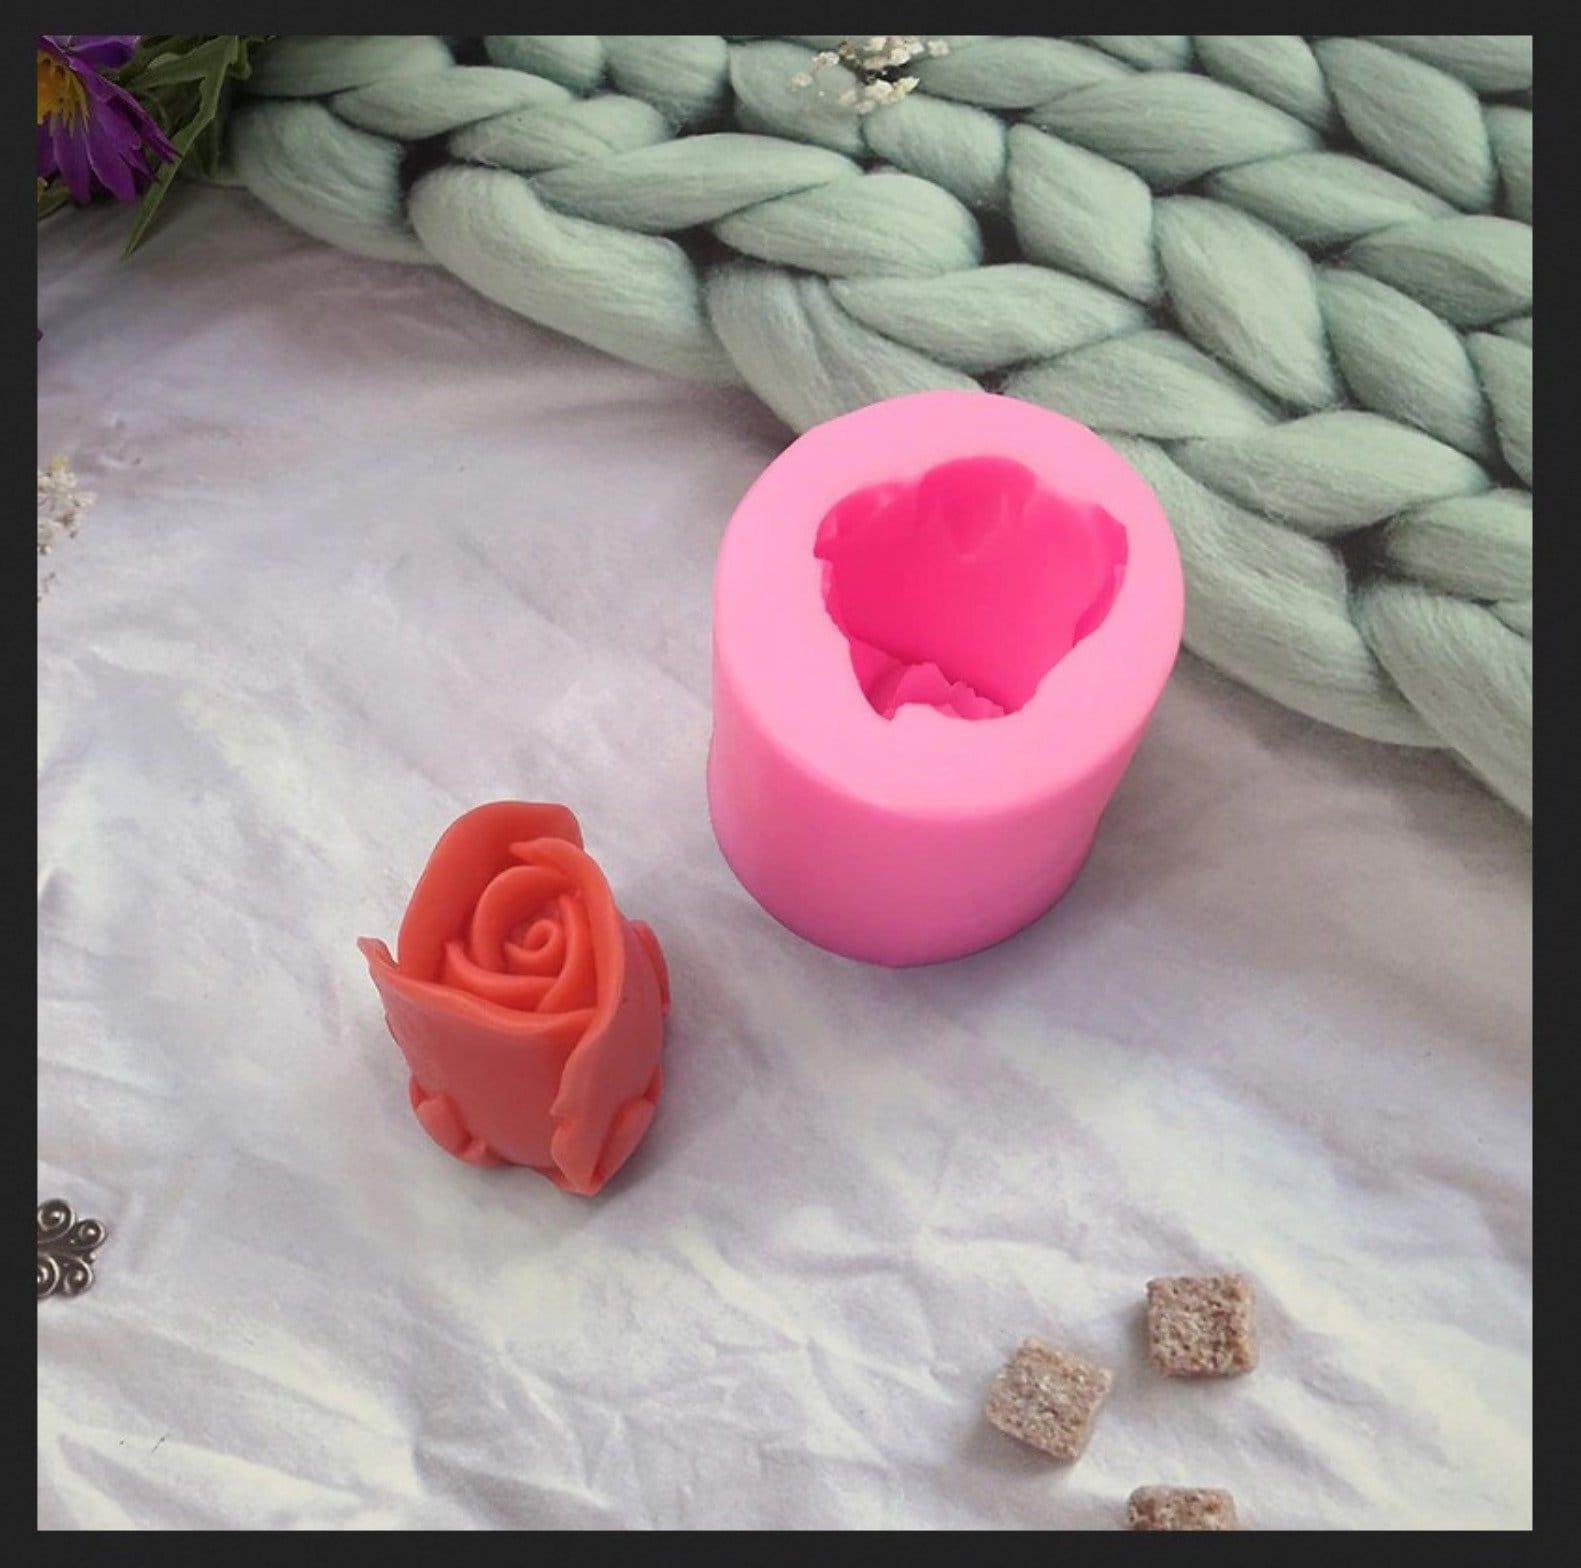 Molds - Rose Casting Molds - Multiple Sizes and types - for Baking, Candle Molds, for Epoxy, Clay or other casting medium